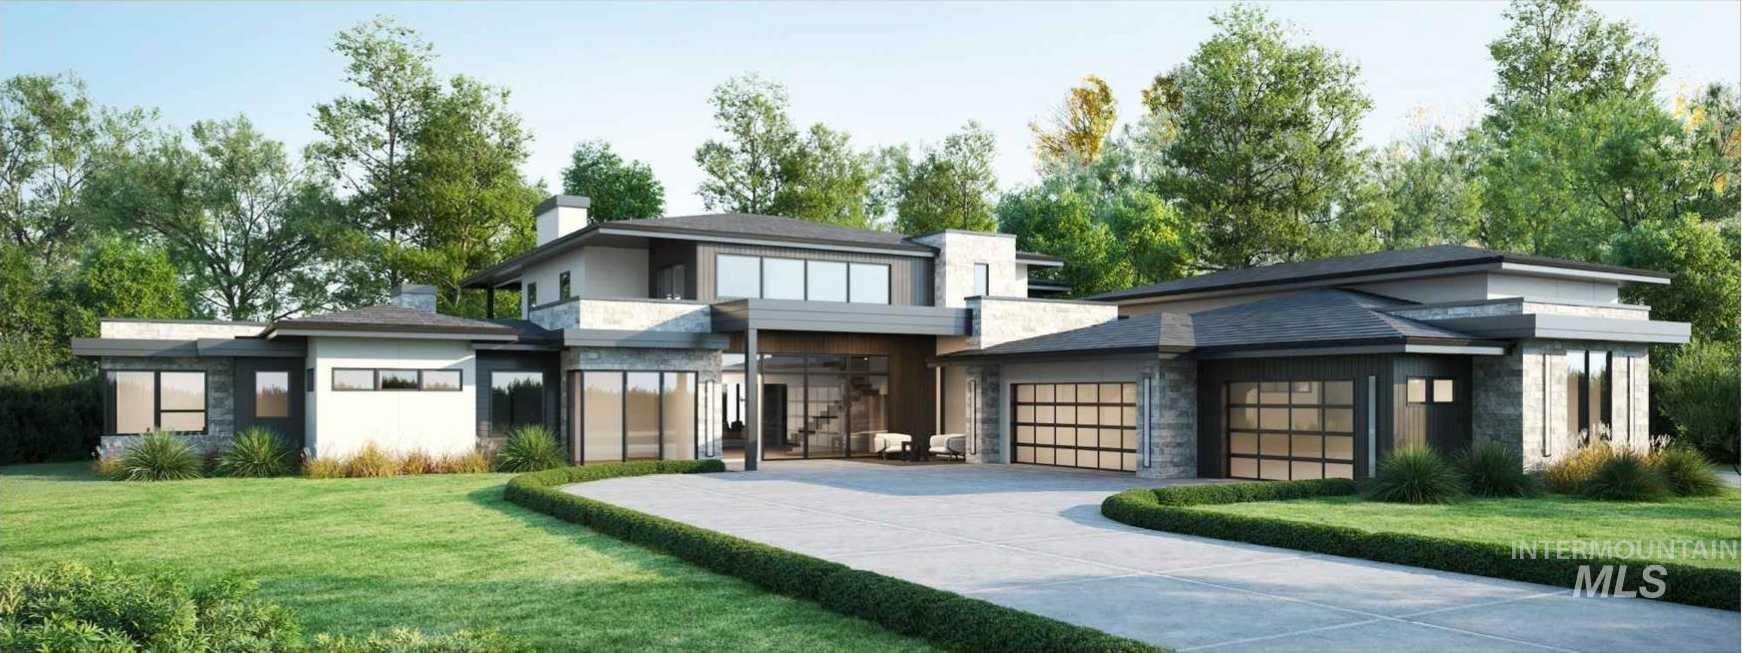 $4,250,000 - 5Br/6Ba -  for Sale in Eagle